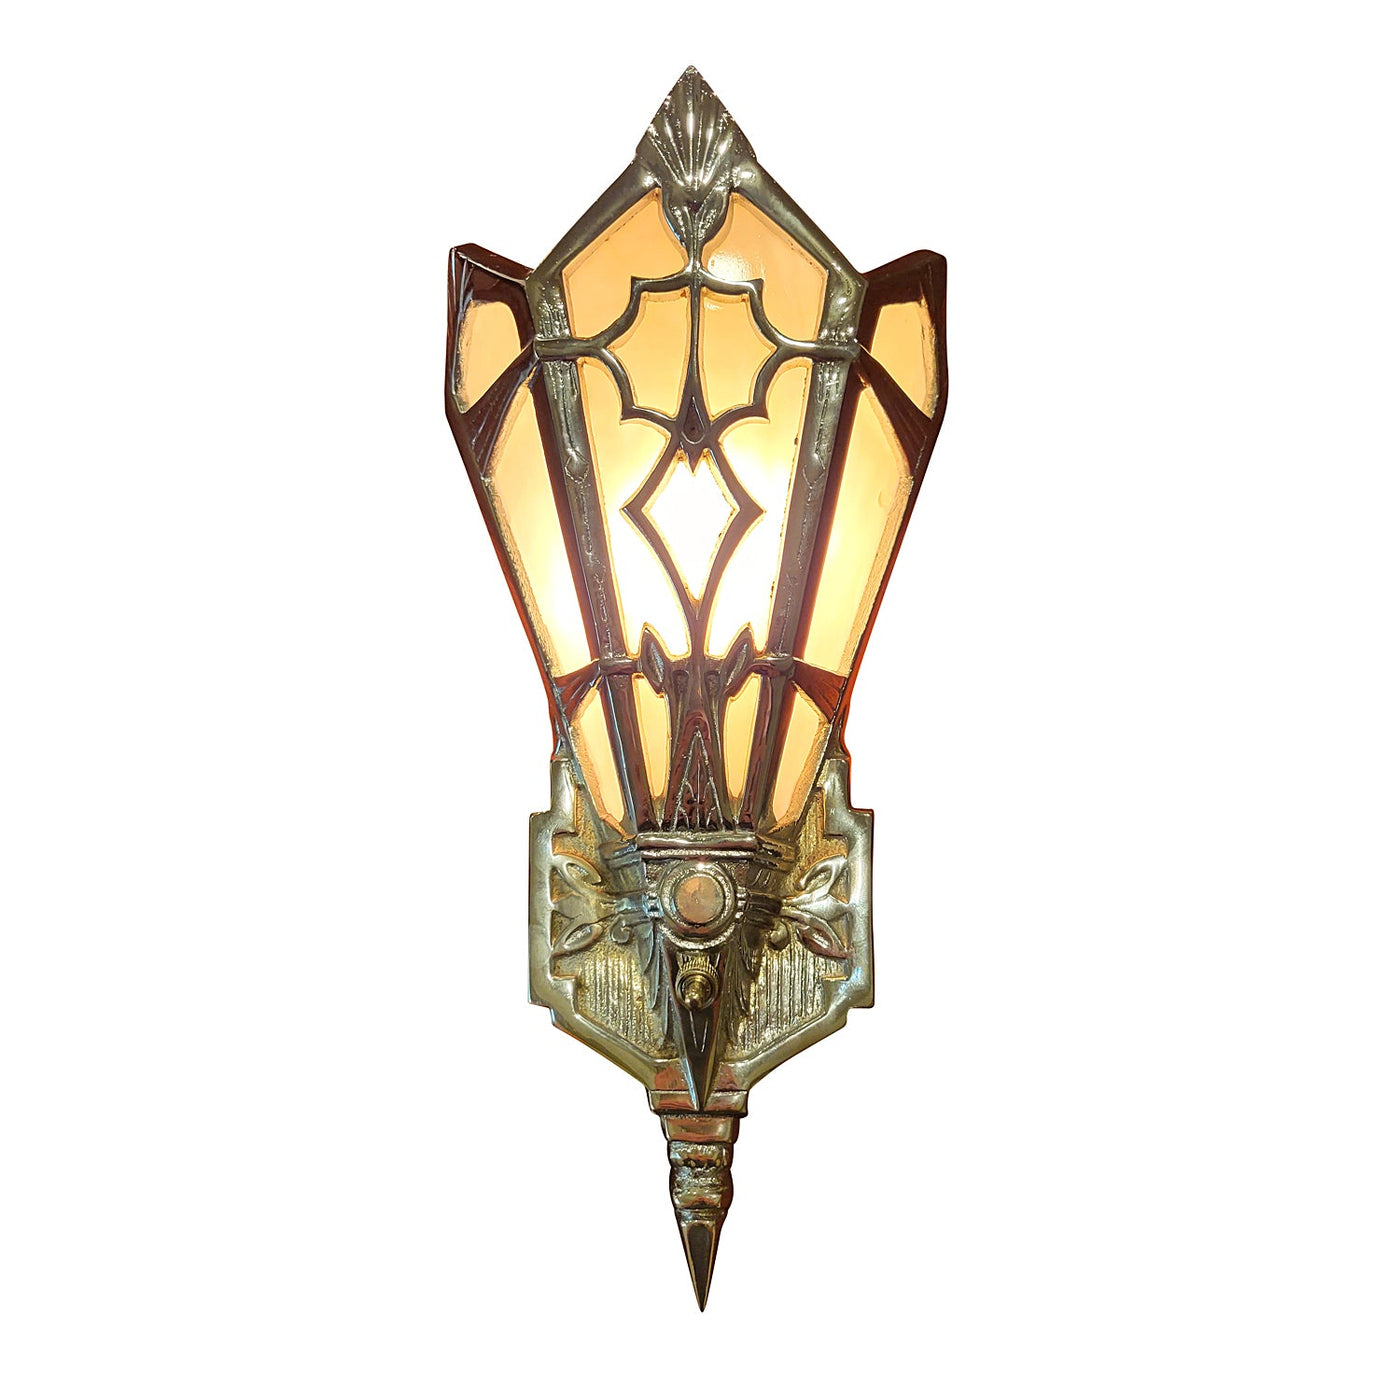 14 Inch Art Deco Stained Glass Shade Pink Champagne Wall Sconce in Polished Chrome